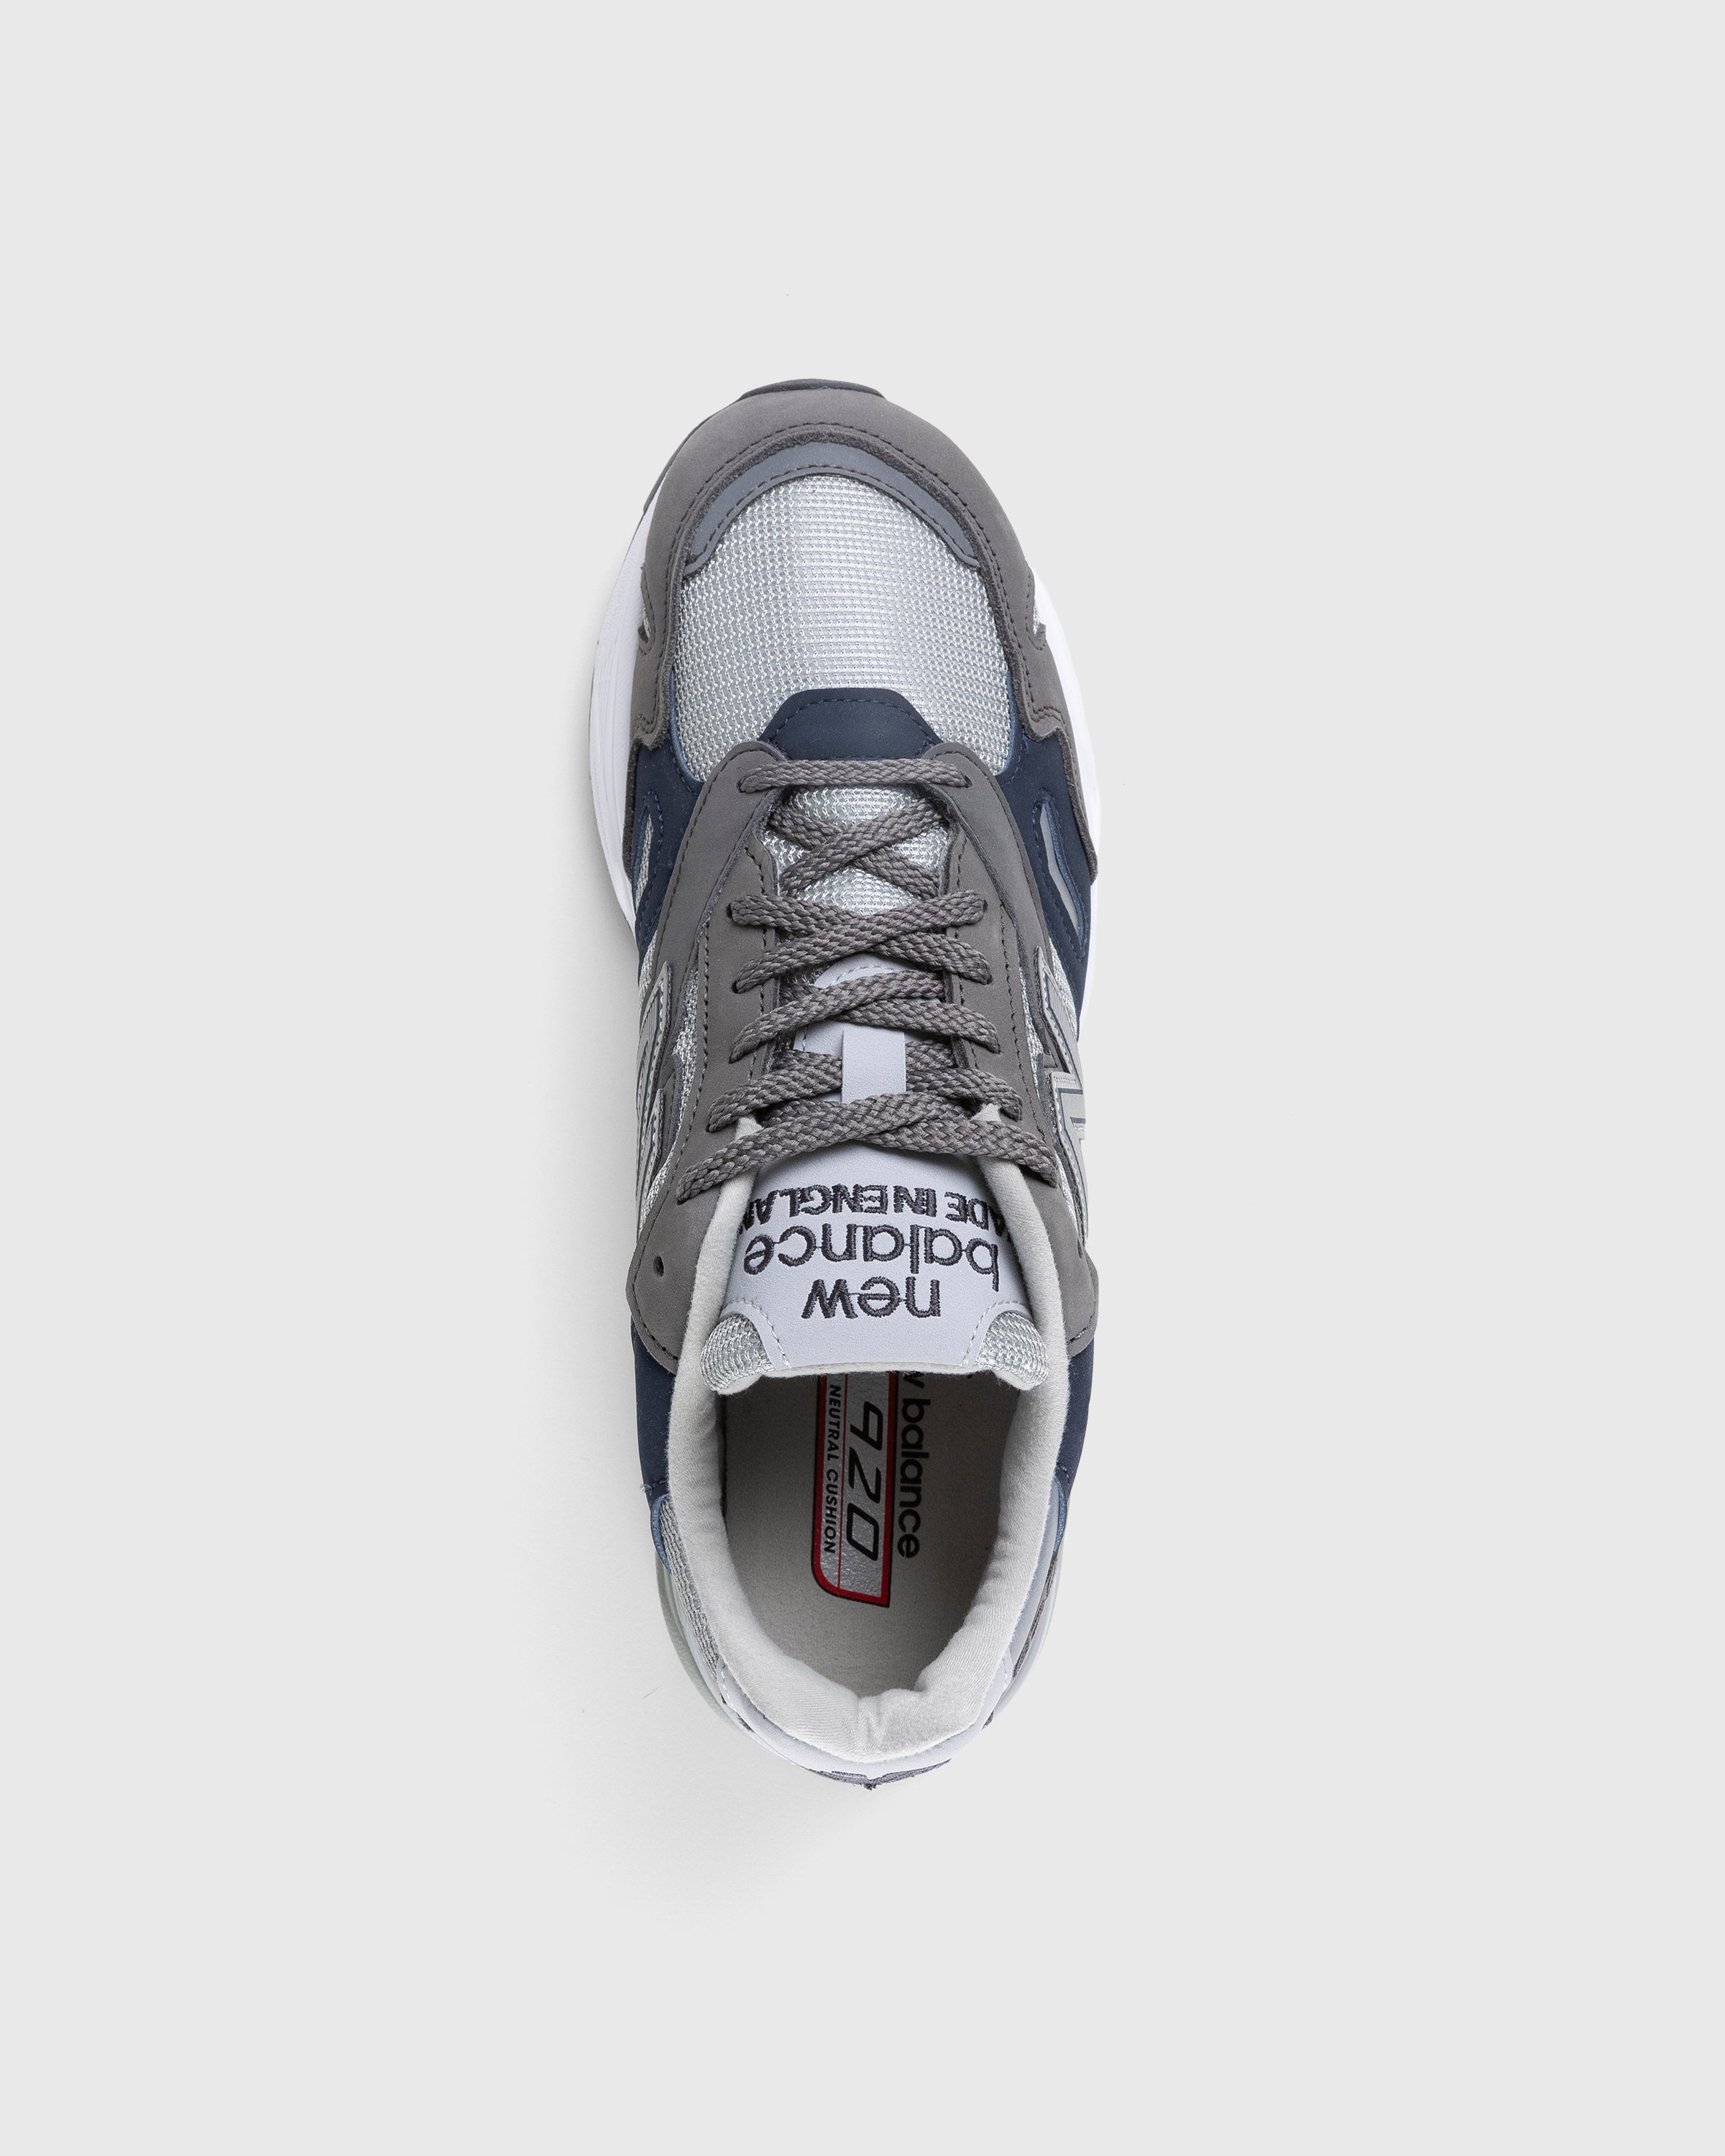 New Balance – M920GNS Grey/Navy - Low Top Sneakers - Grey - Image 5